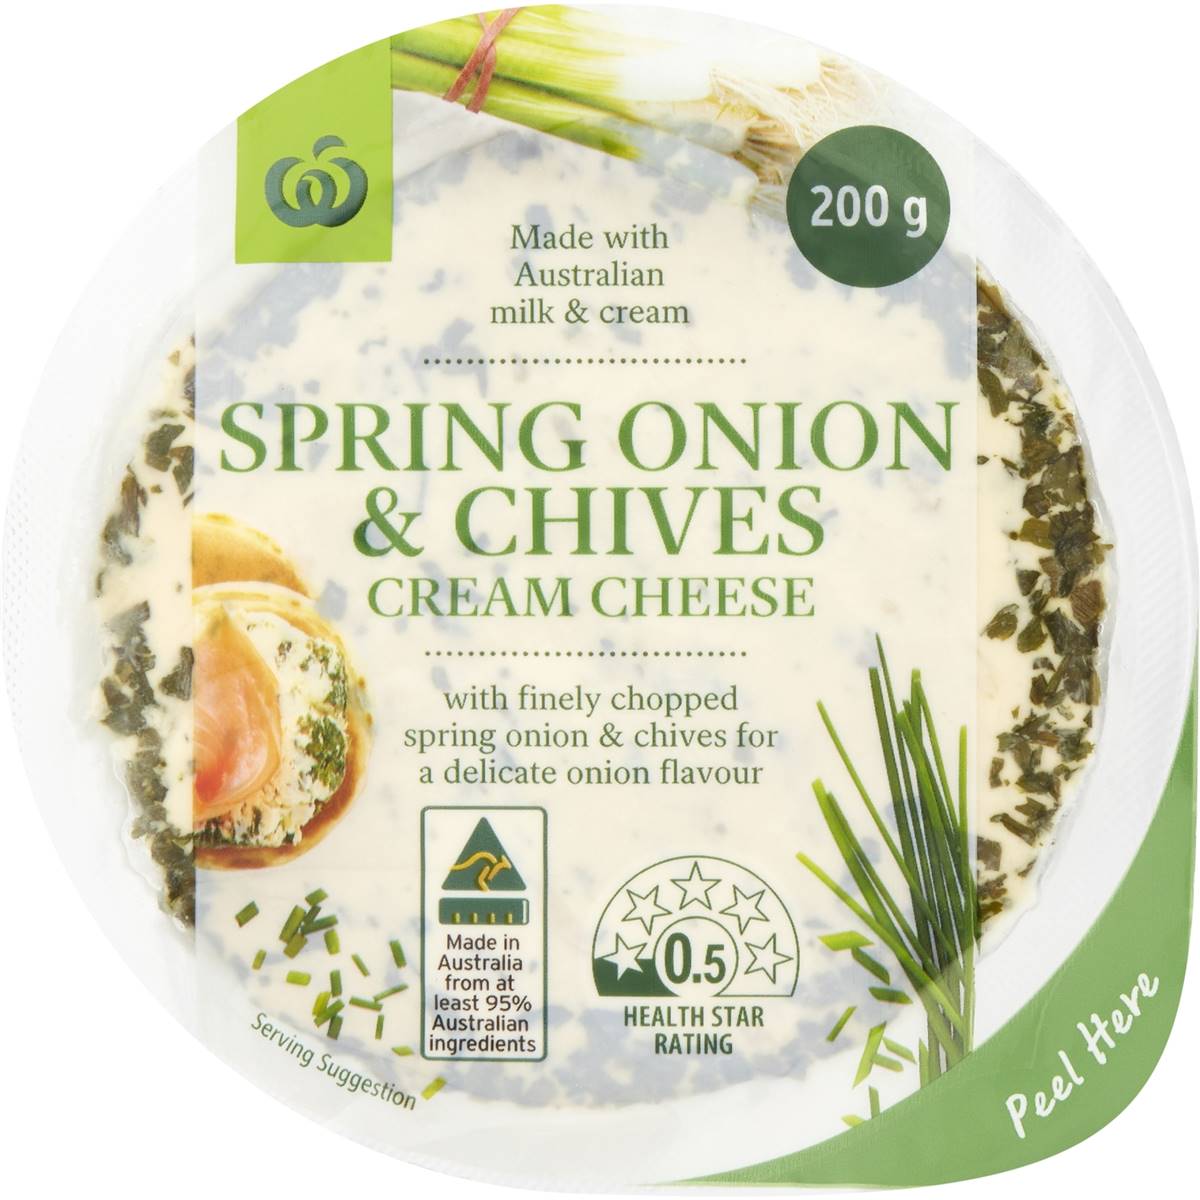 Calories in Woolworths Spring Onion & Chive Cream Cheese